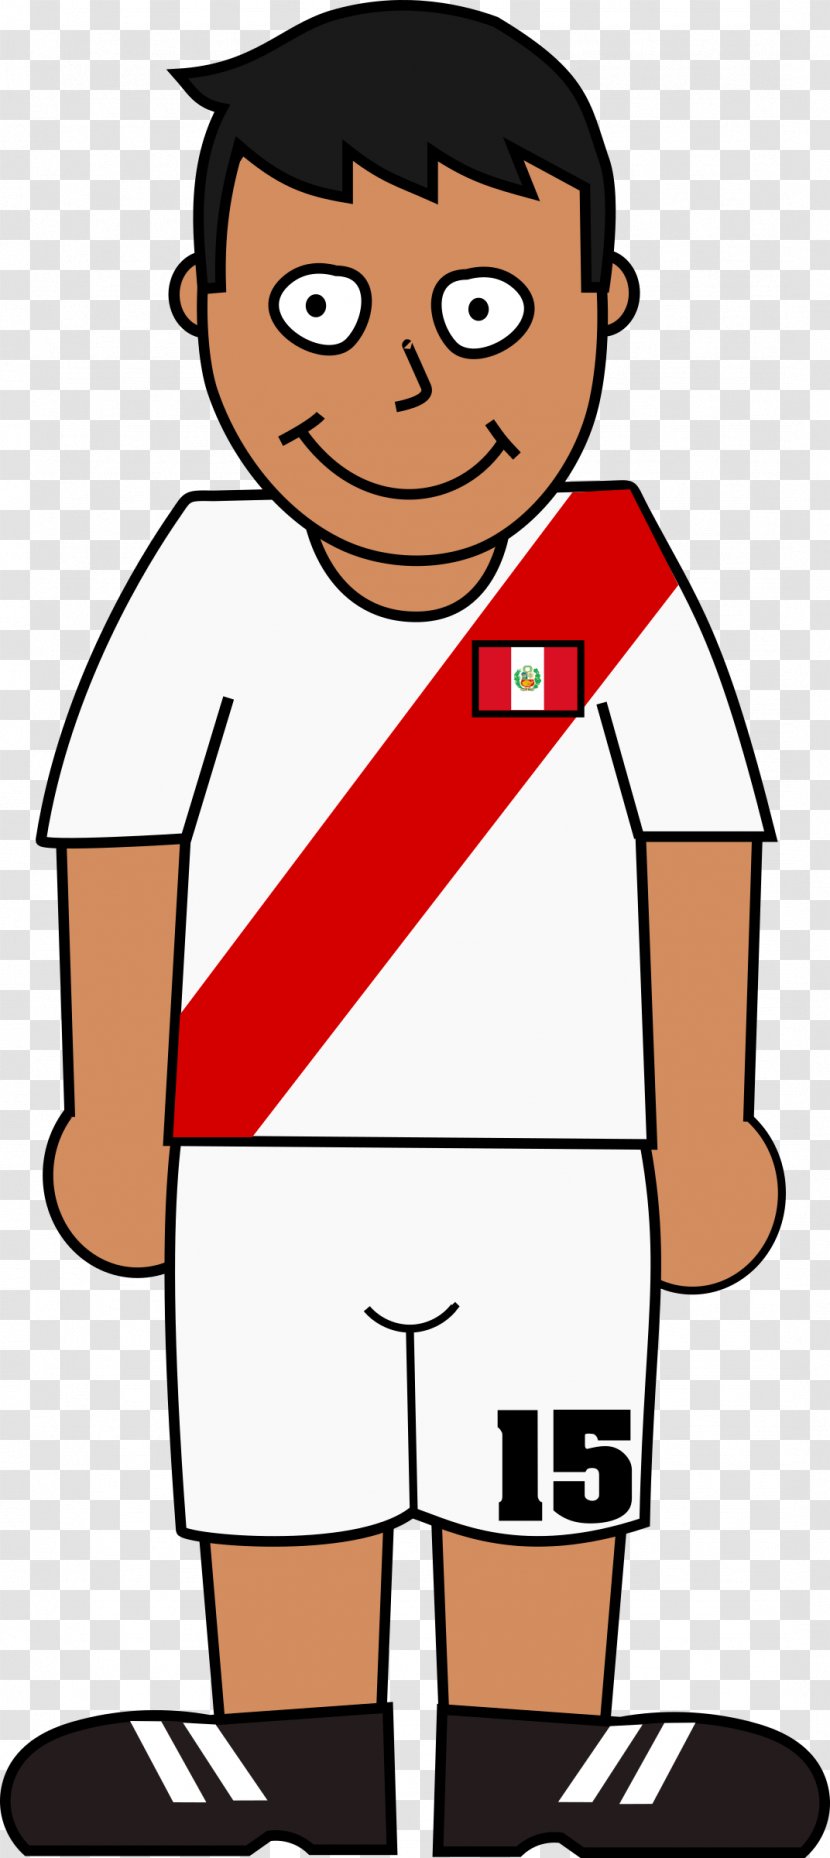 2018 World Cup 2014 FIFA Clip Art Football Player - Child Transparent PNG